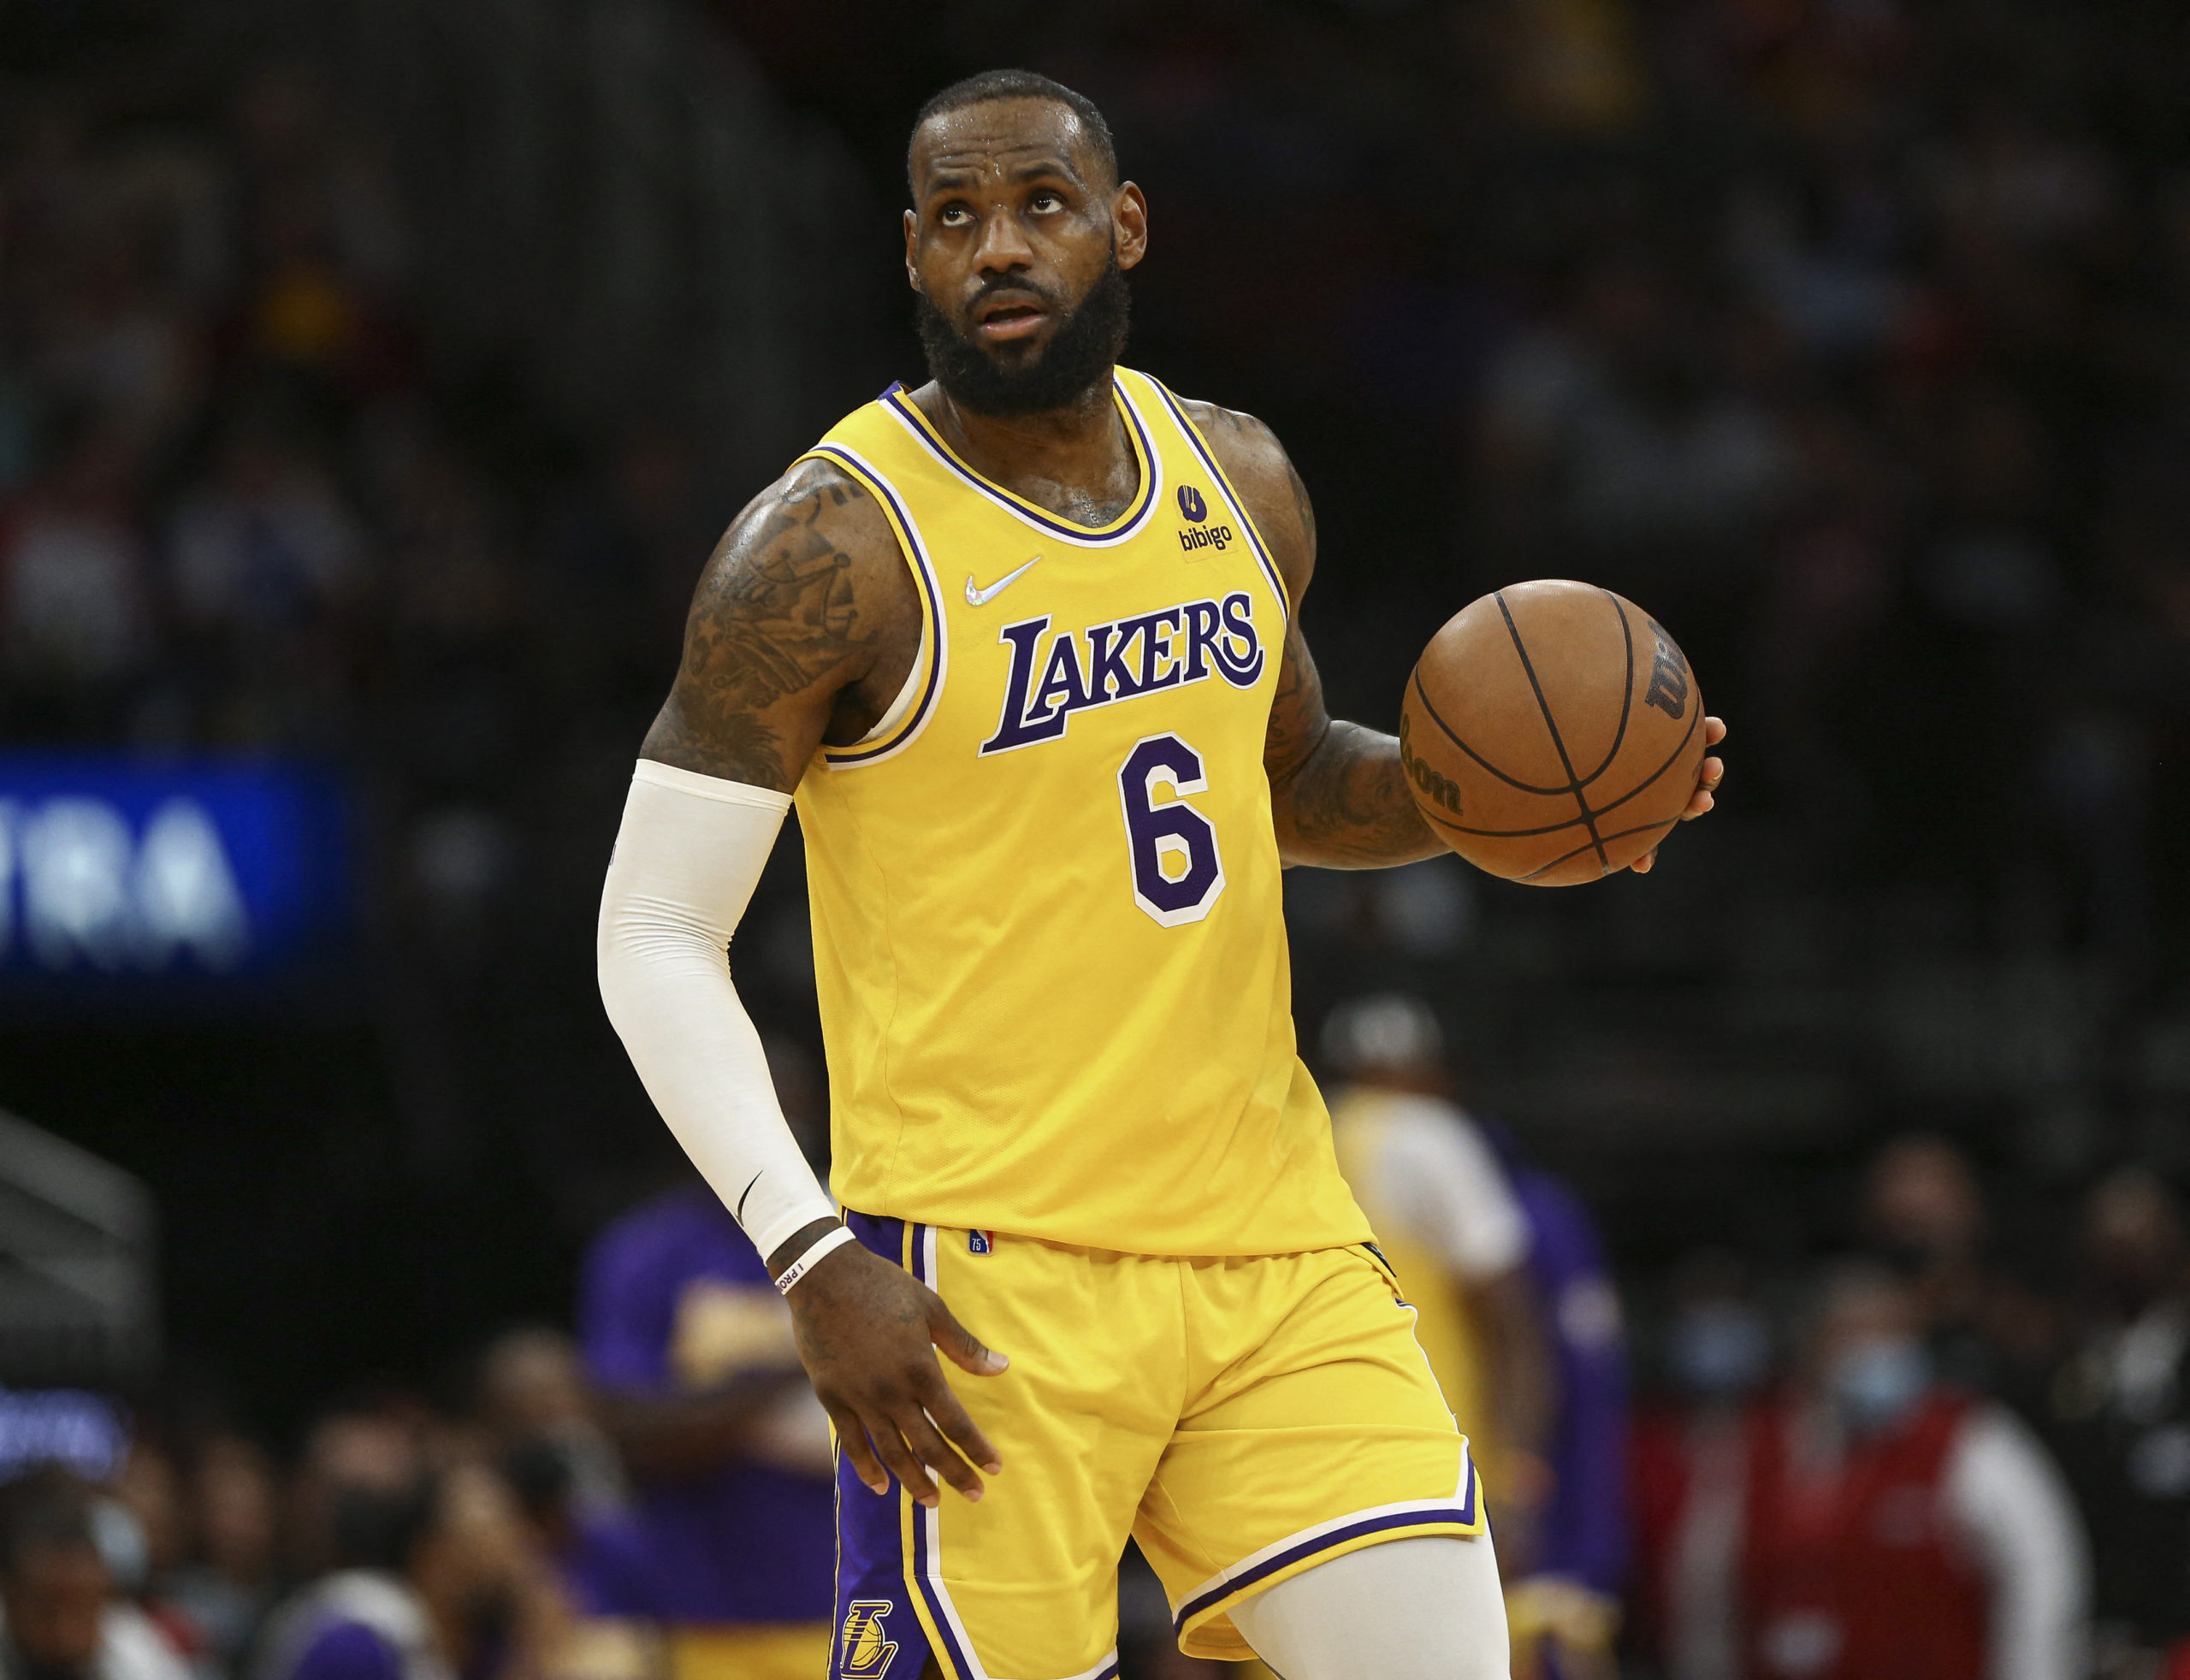 Los Angeles Lakers forward LeBron James (6) dribbles the ball during the fourth quarter against the Houston Rockets at Toyota Center. 